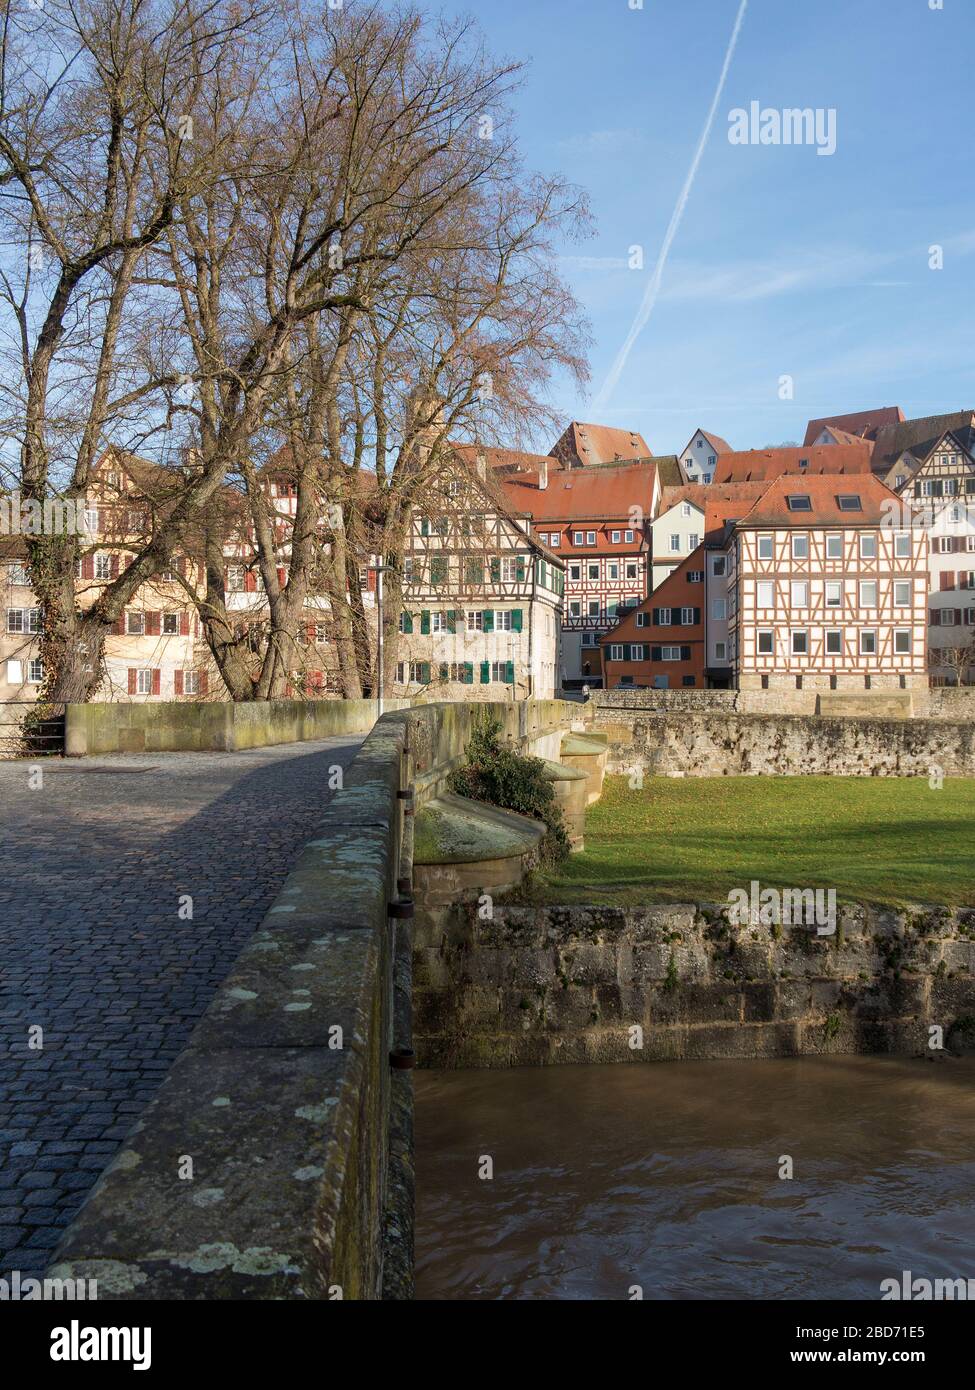 Townscape of medieval Schwaebisch Hall in Germany Stock Photo